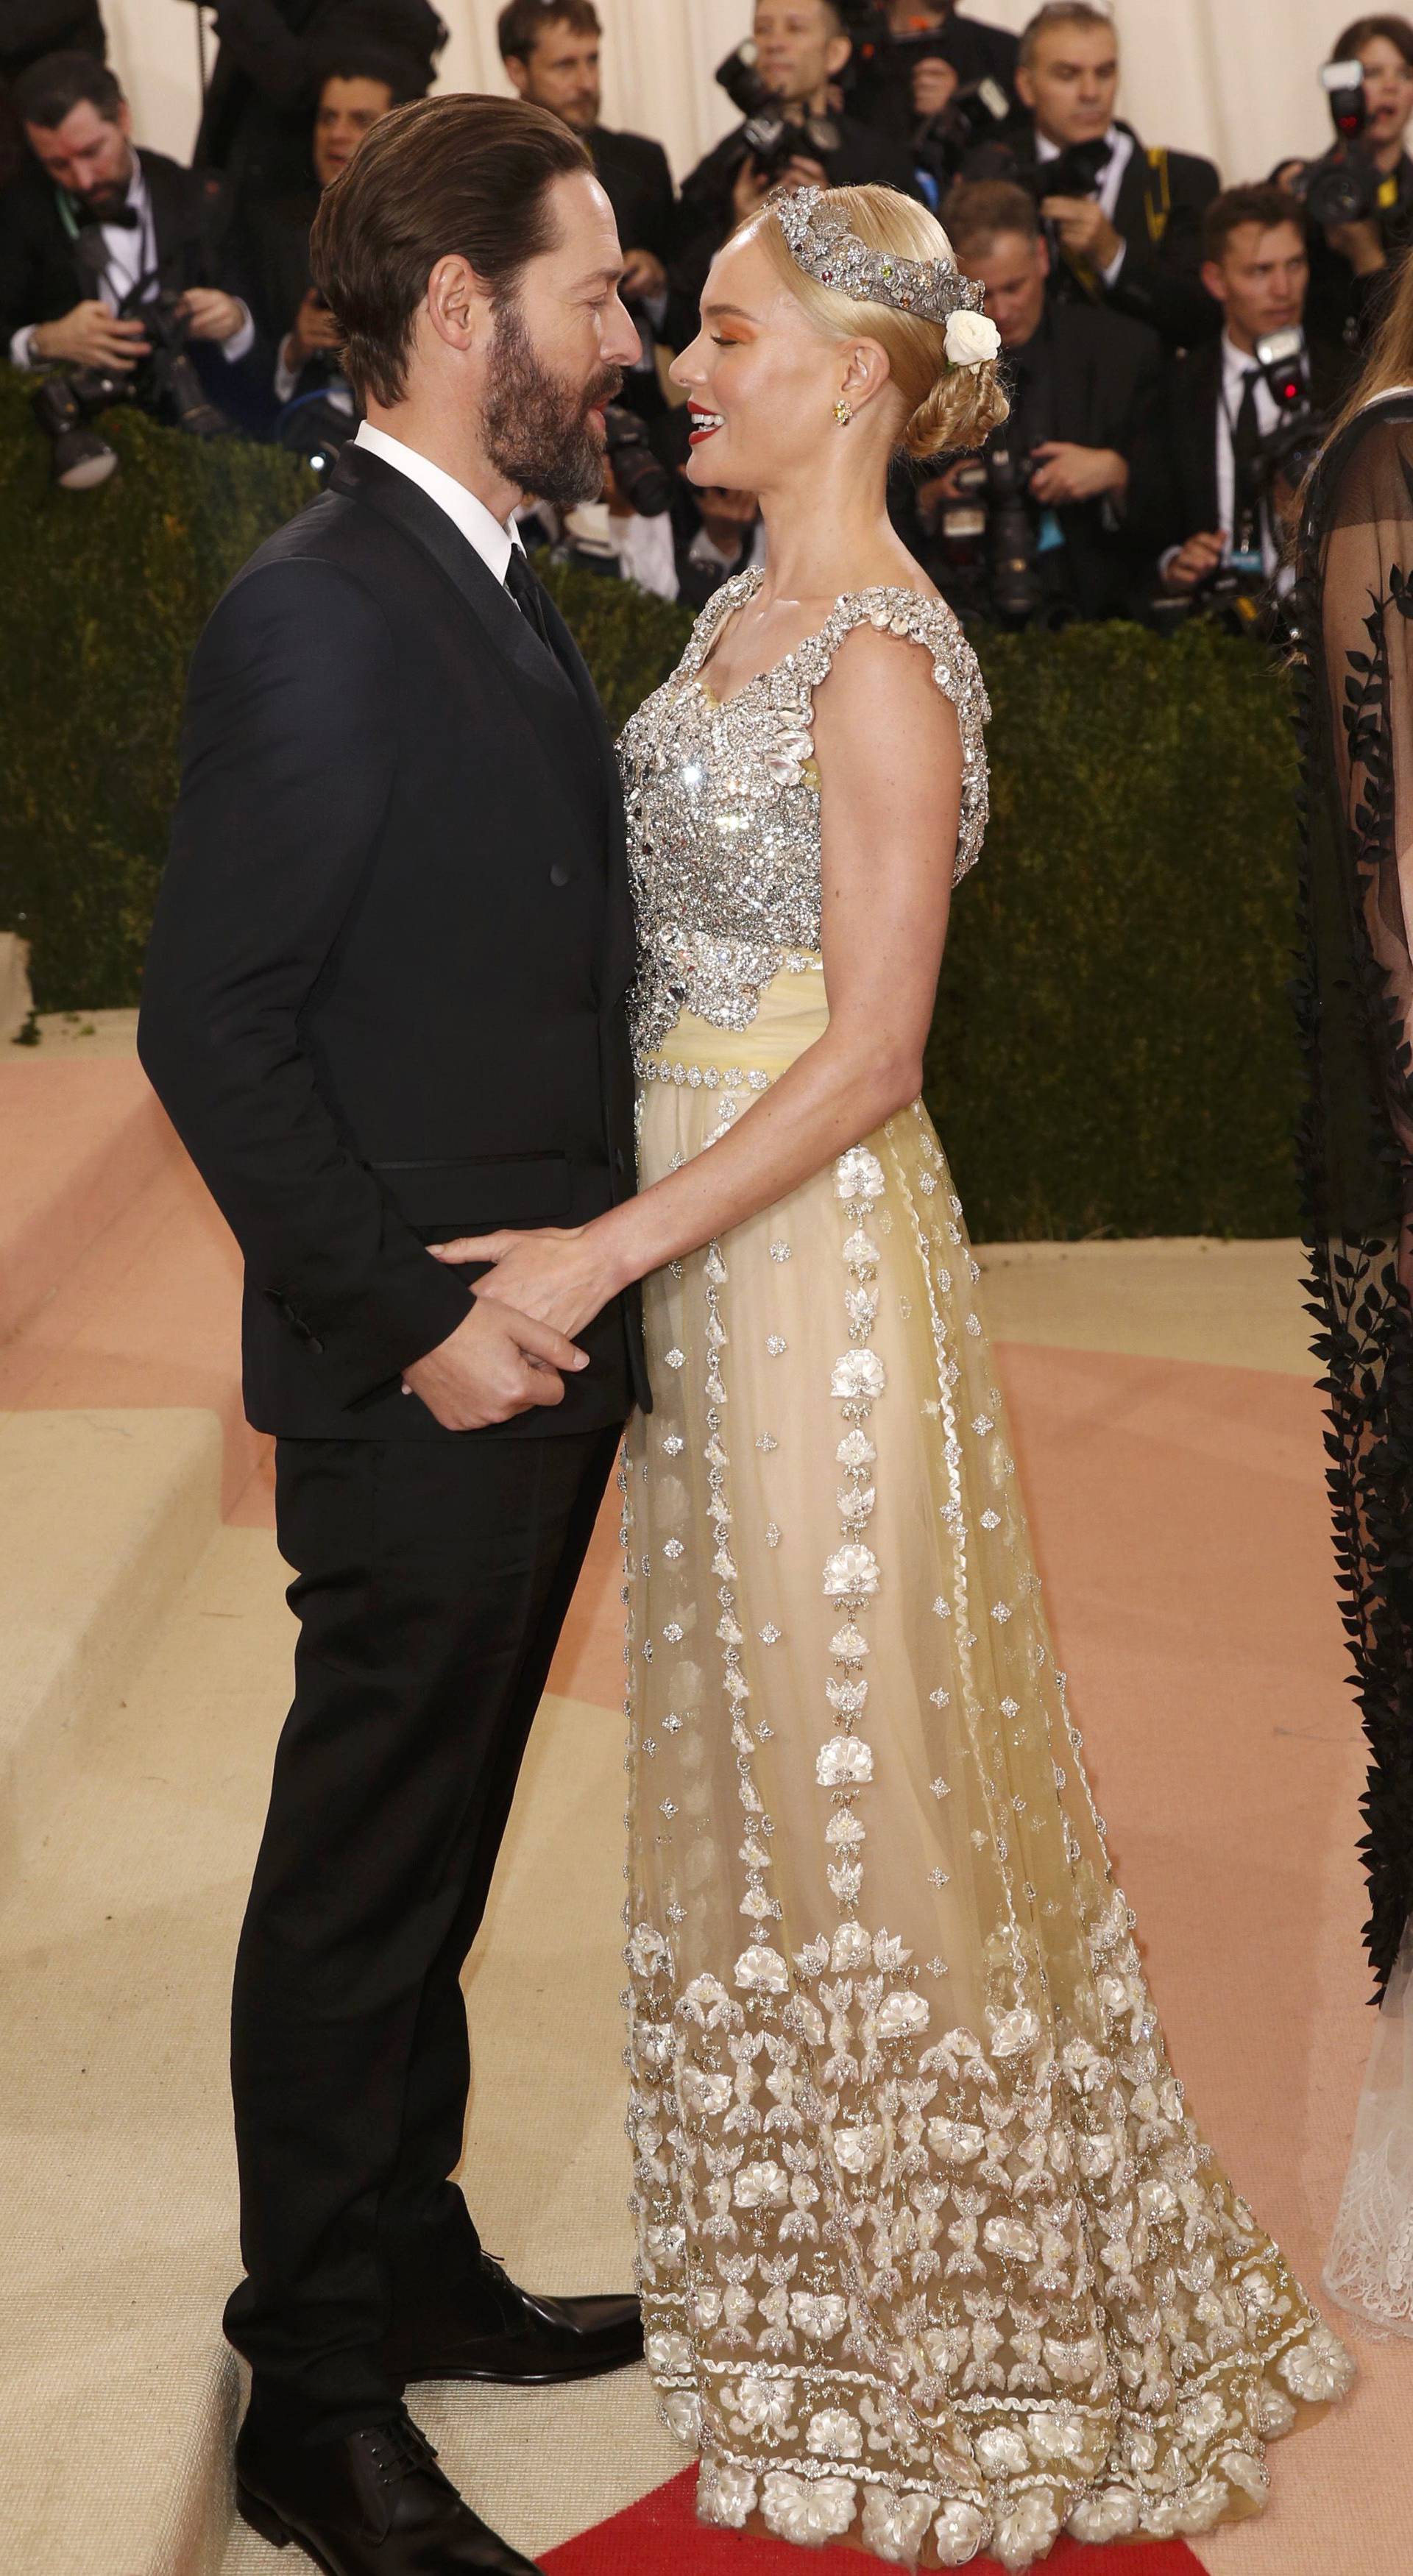 Actress Bosworth and husband Polish arrive at the Met Gala in New York